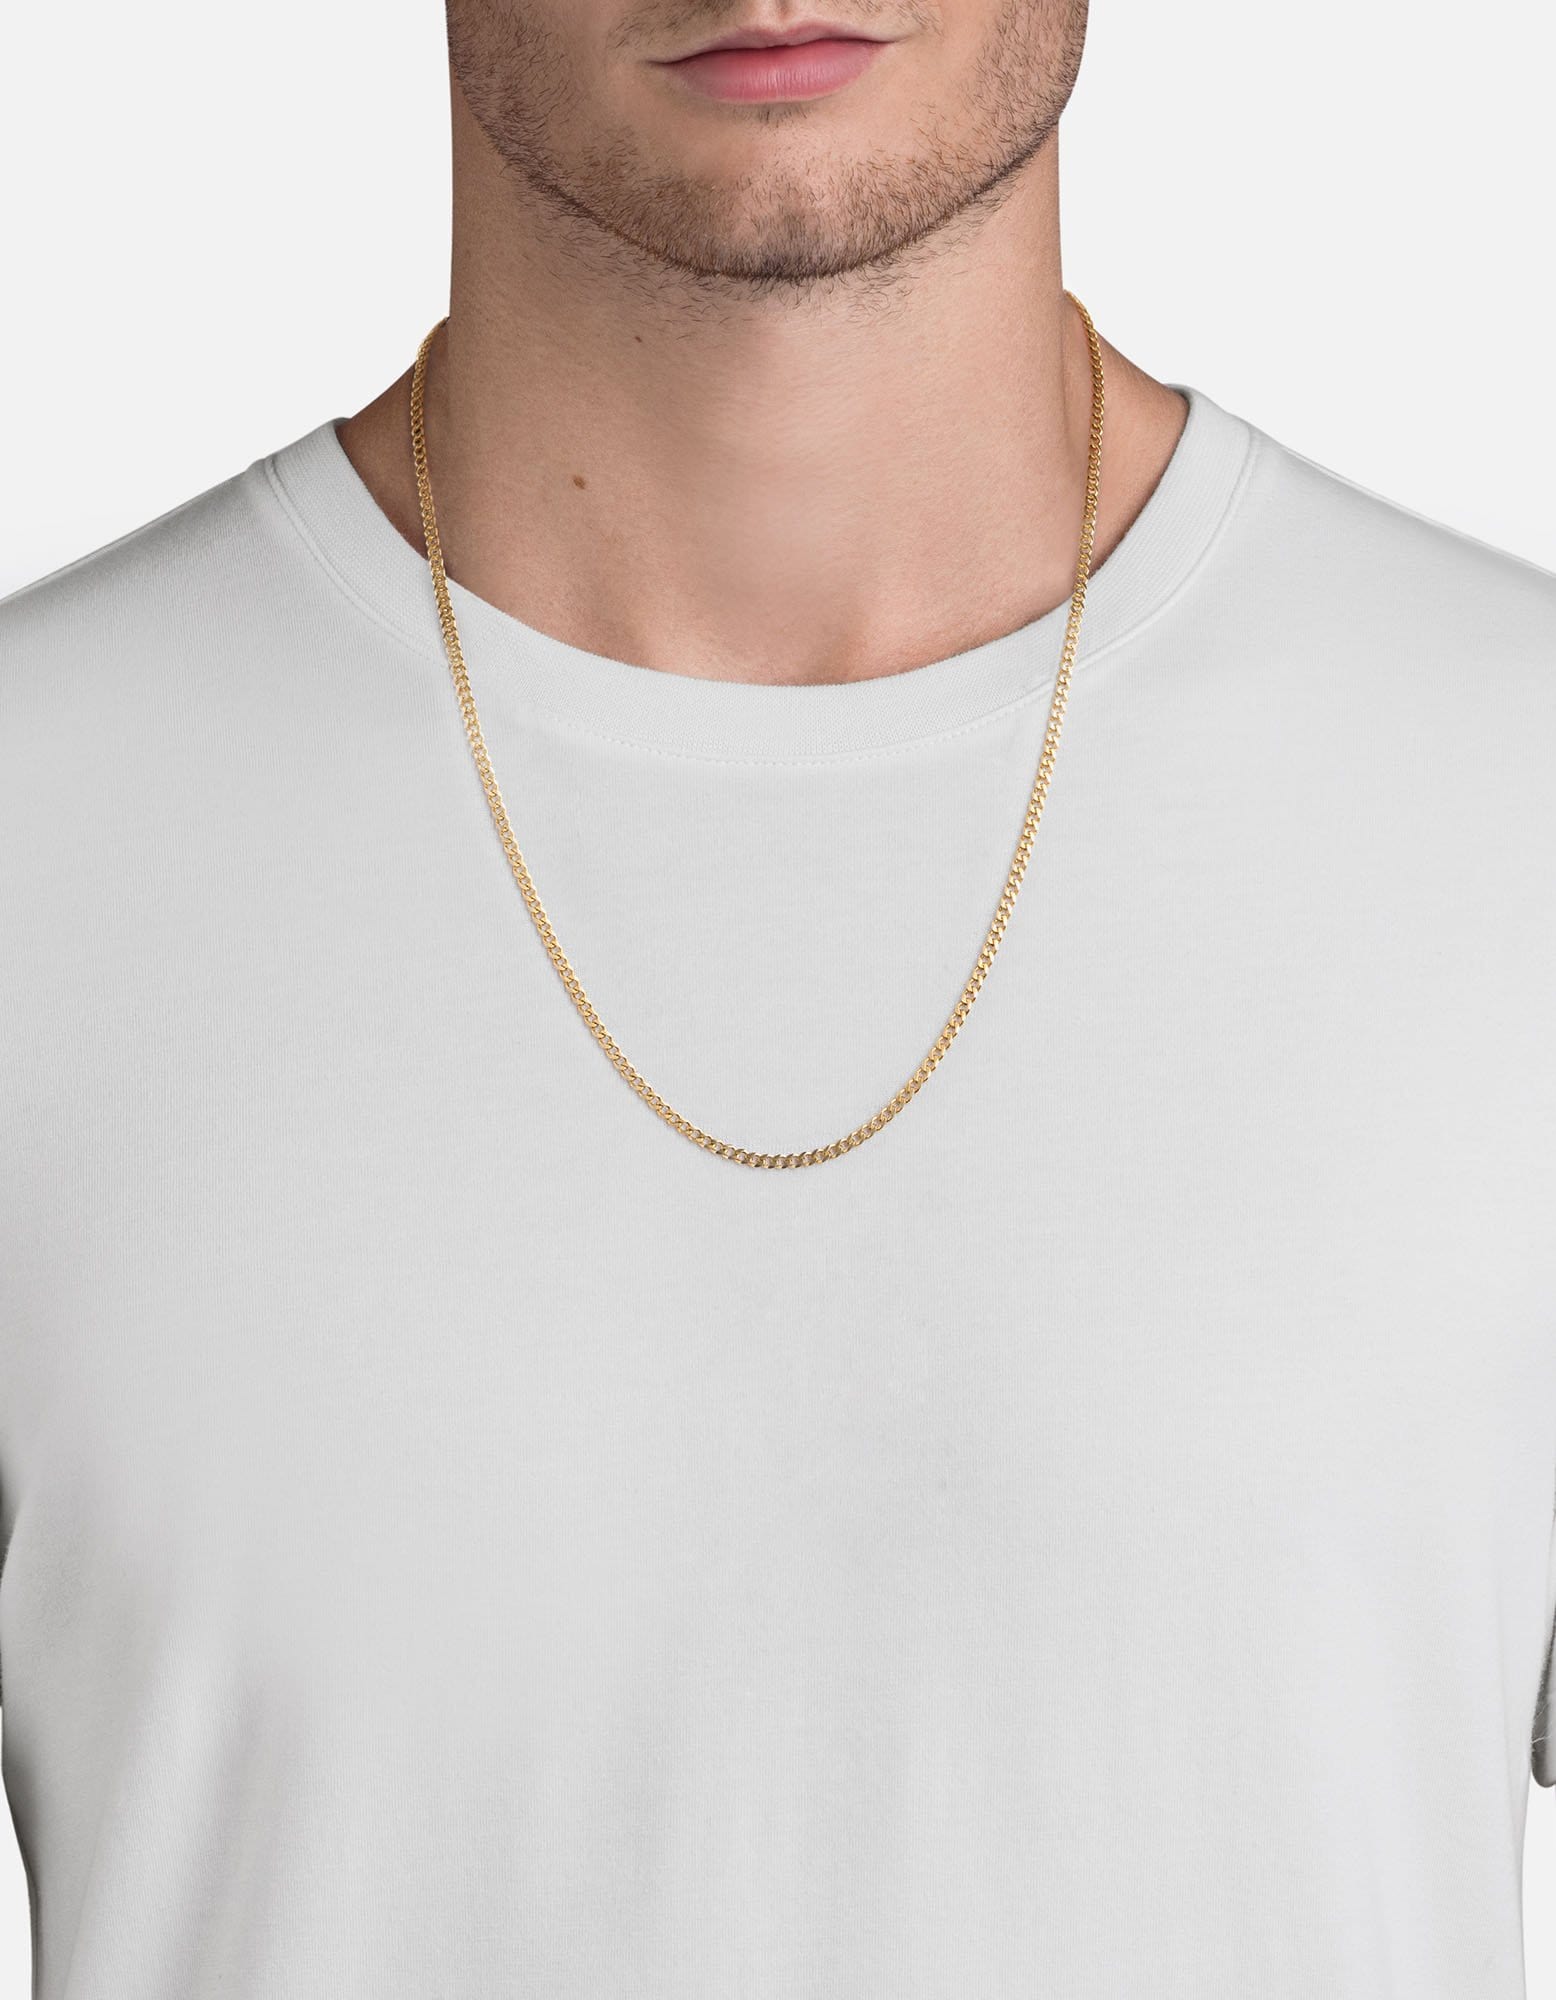 2.5mm Volt Link Cable Chain Necklace, 14k Yellow Gold